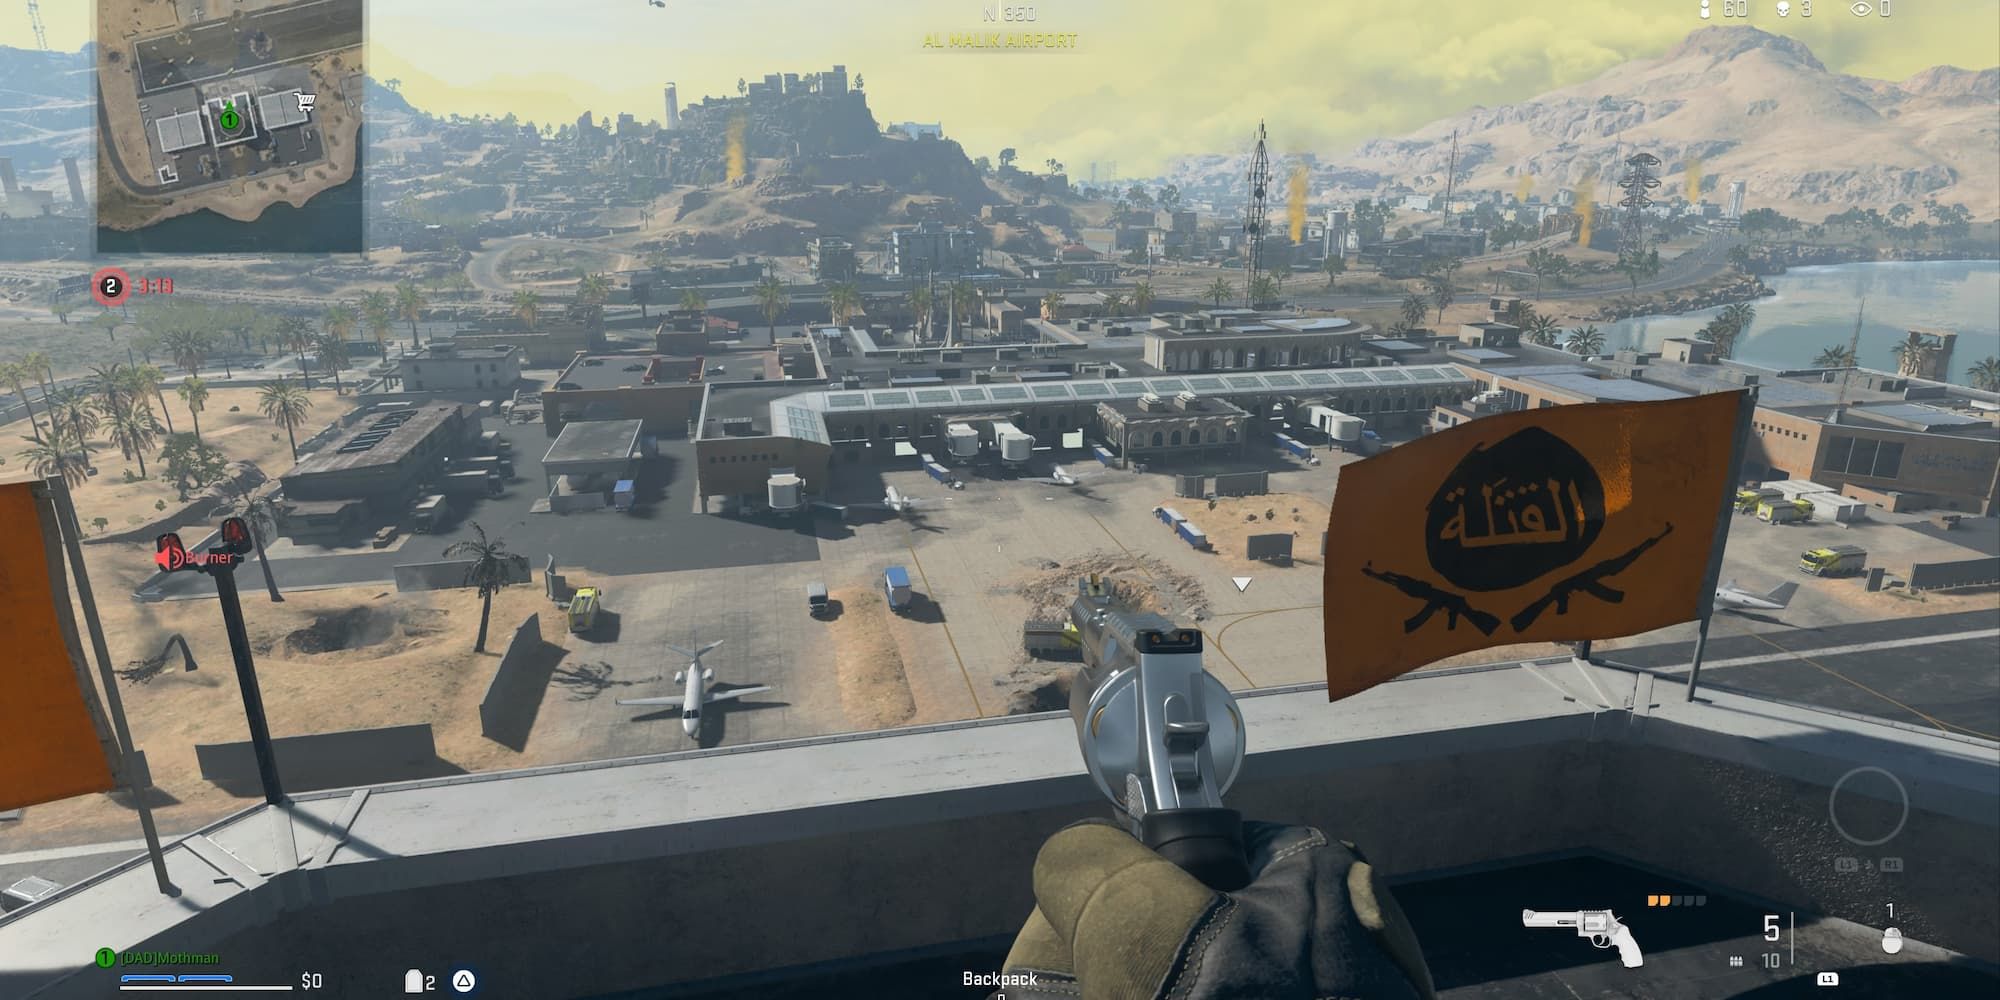 A player and his revolver look down at the Al Malik Airport from the top of the air traffic control tower.